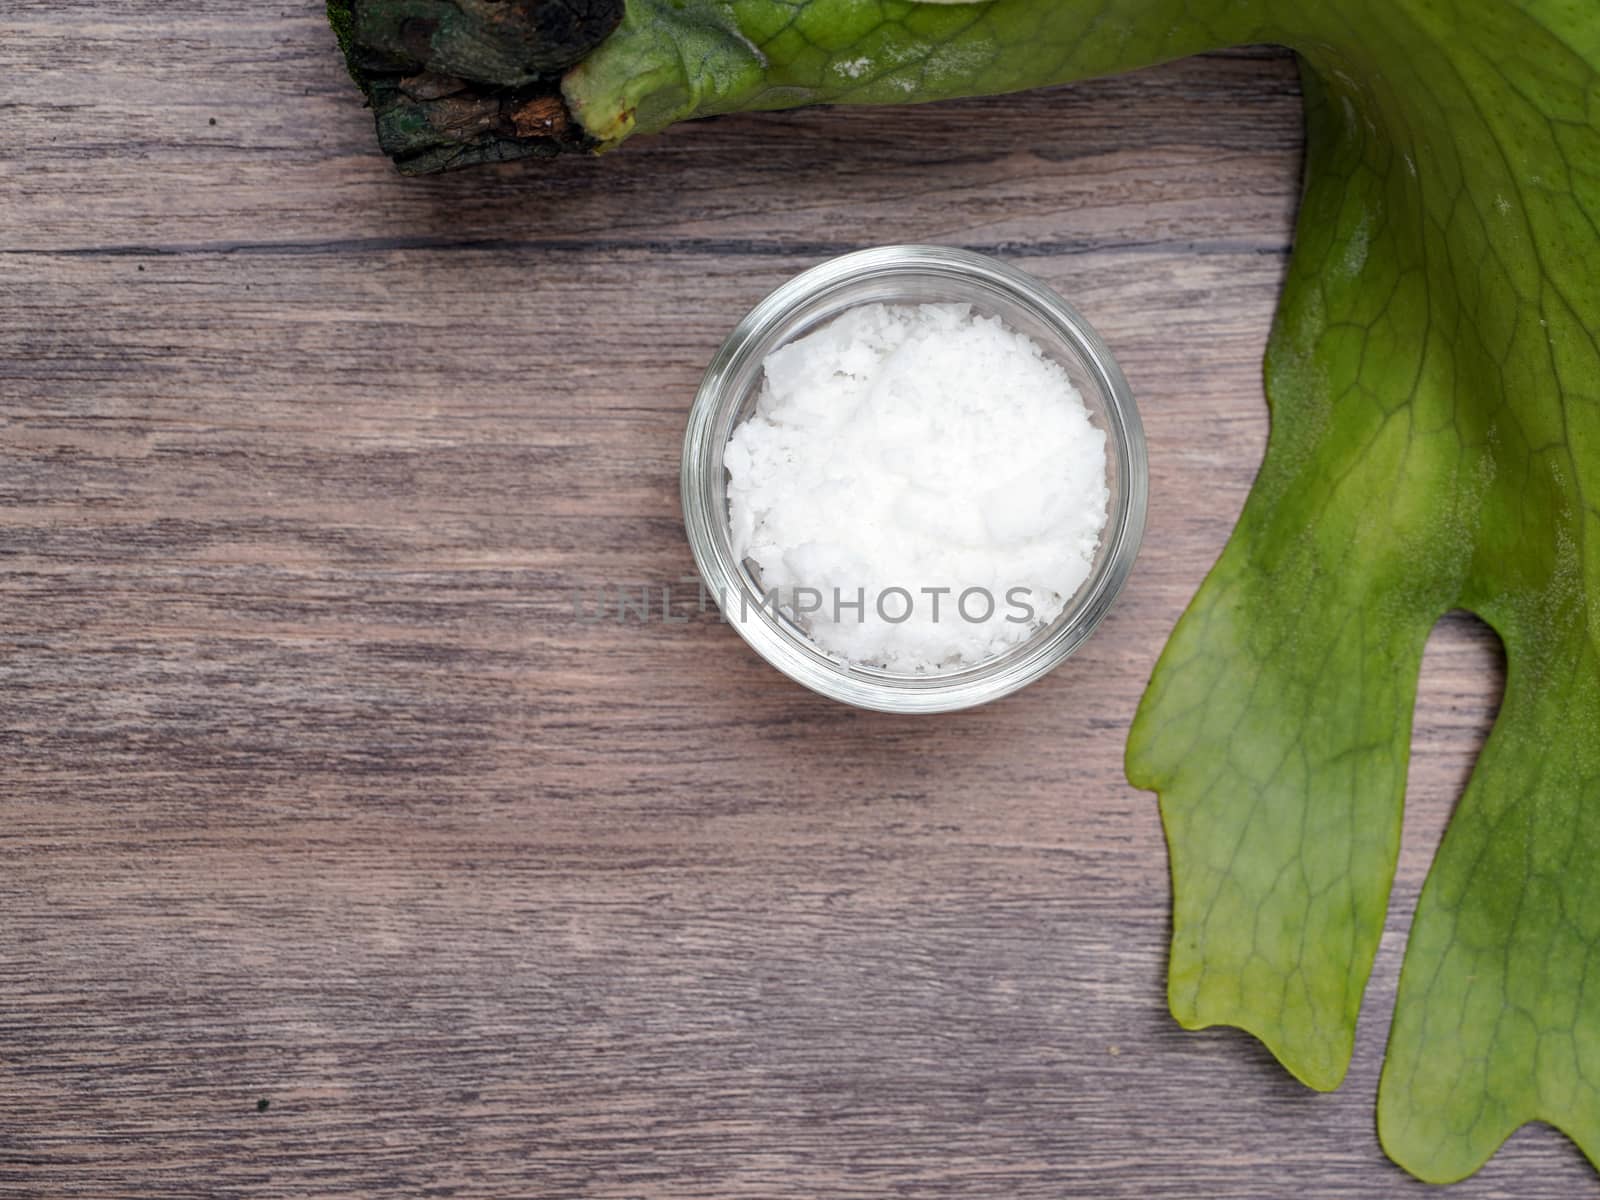 Cetyl esters wax - Cosmetic chemicals ingredient on wooden table